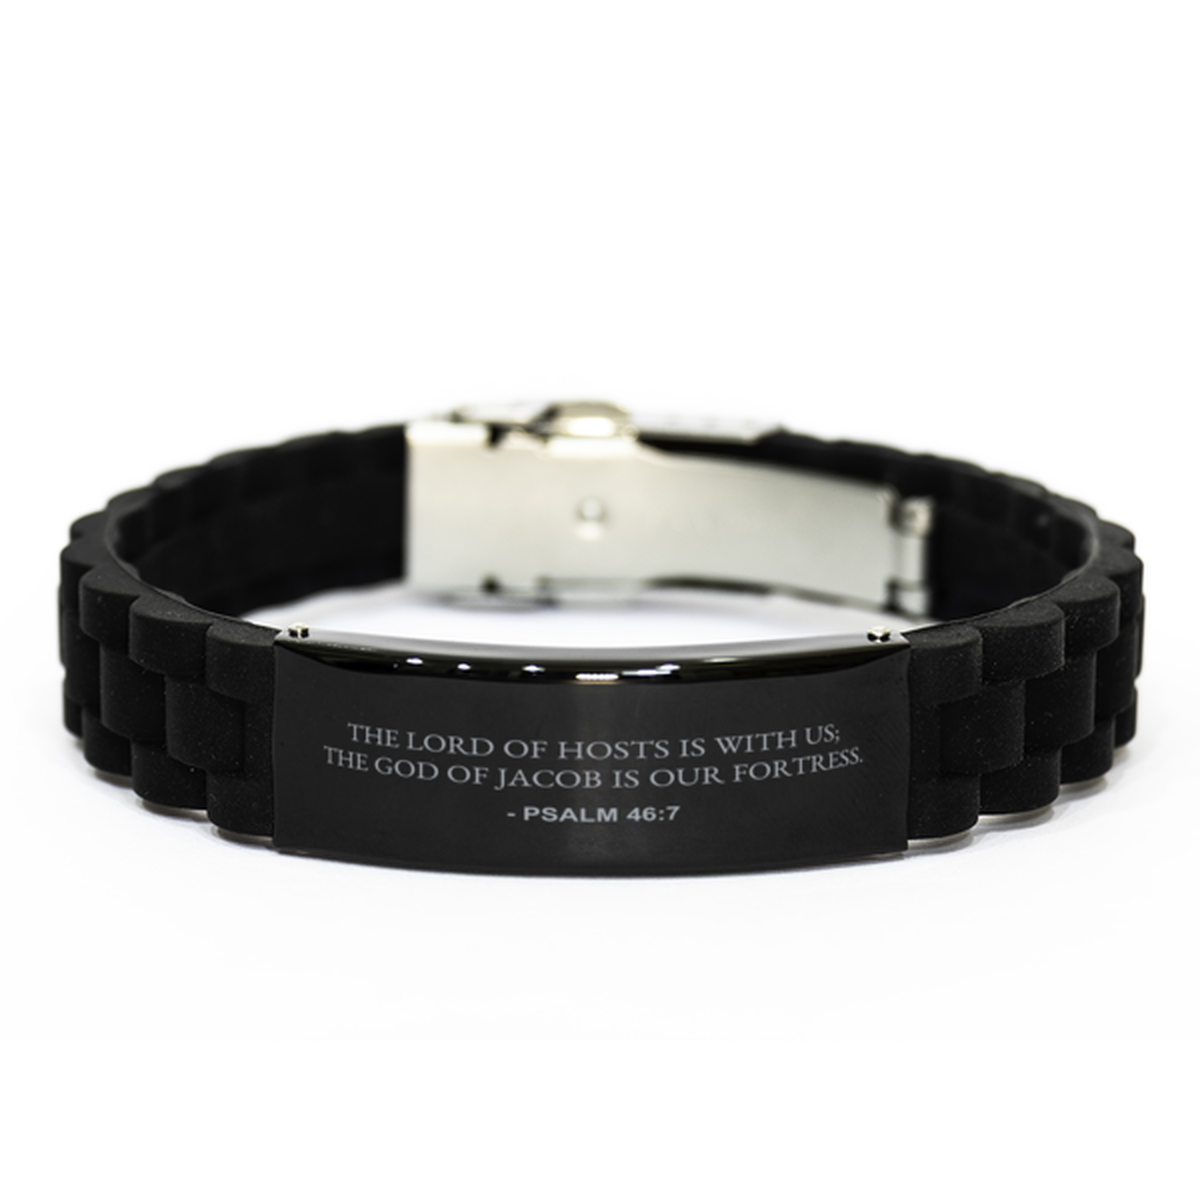 Bible Verse Black Bracelet,, Psalm 46:7 The Lord Of Hosts Is With Us; The God Of Jacob Is, Inspirational Christian Gifts For Men Women